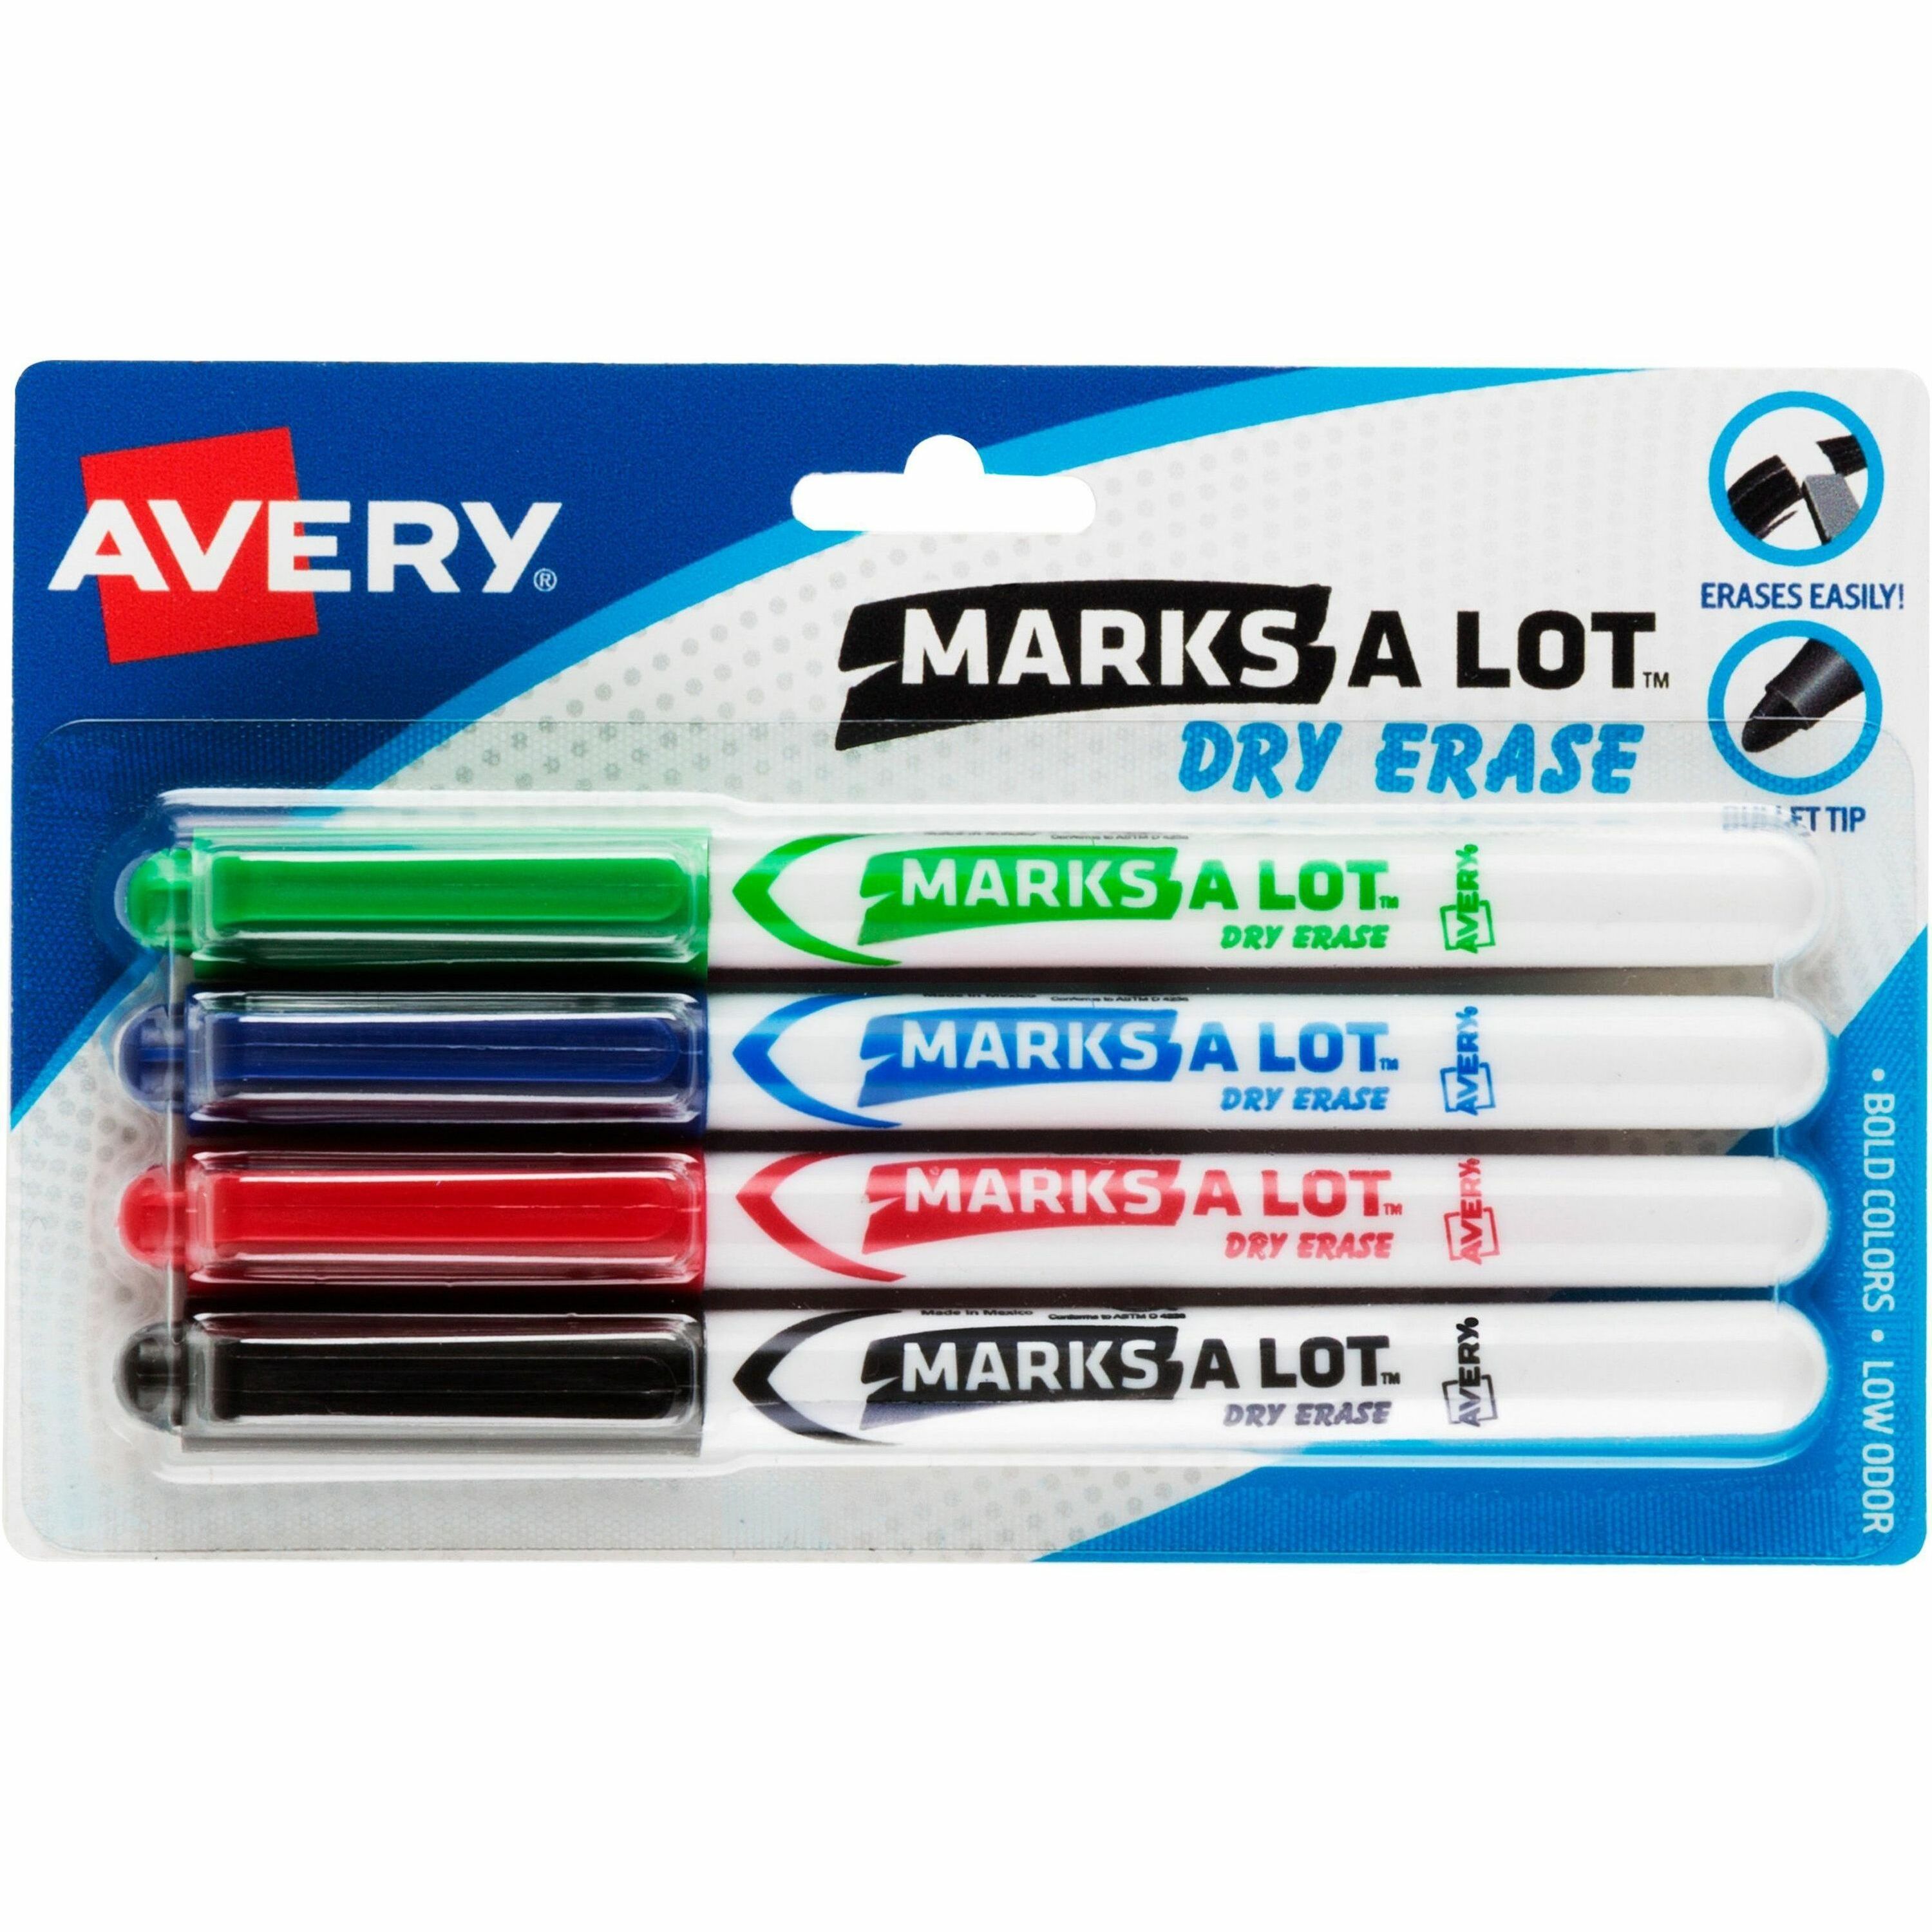 Dry Erase Markers - New 5 Pack - Magnetic Whiteboard Markers with Attached Erasers - Low Odor, Black